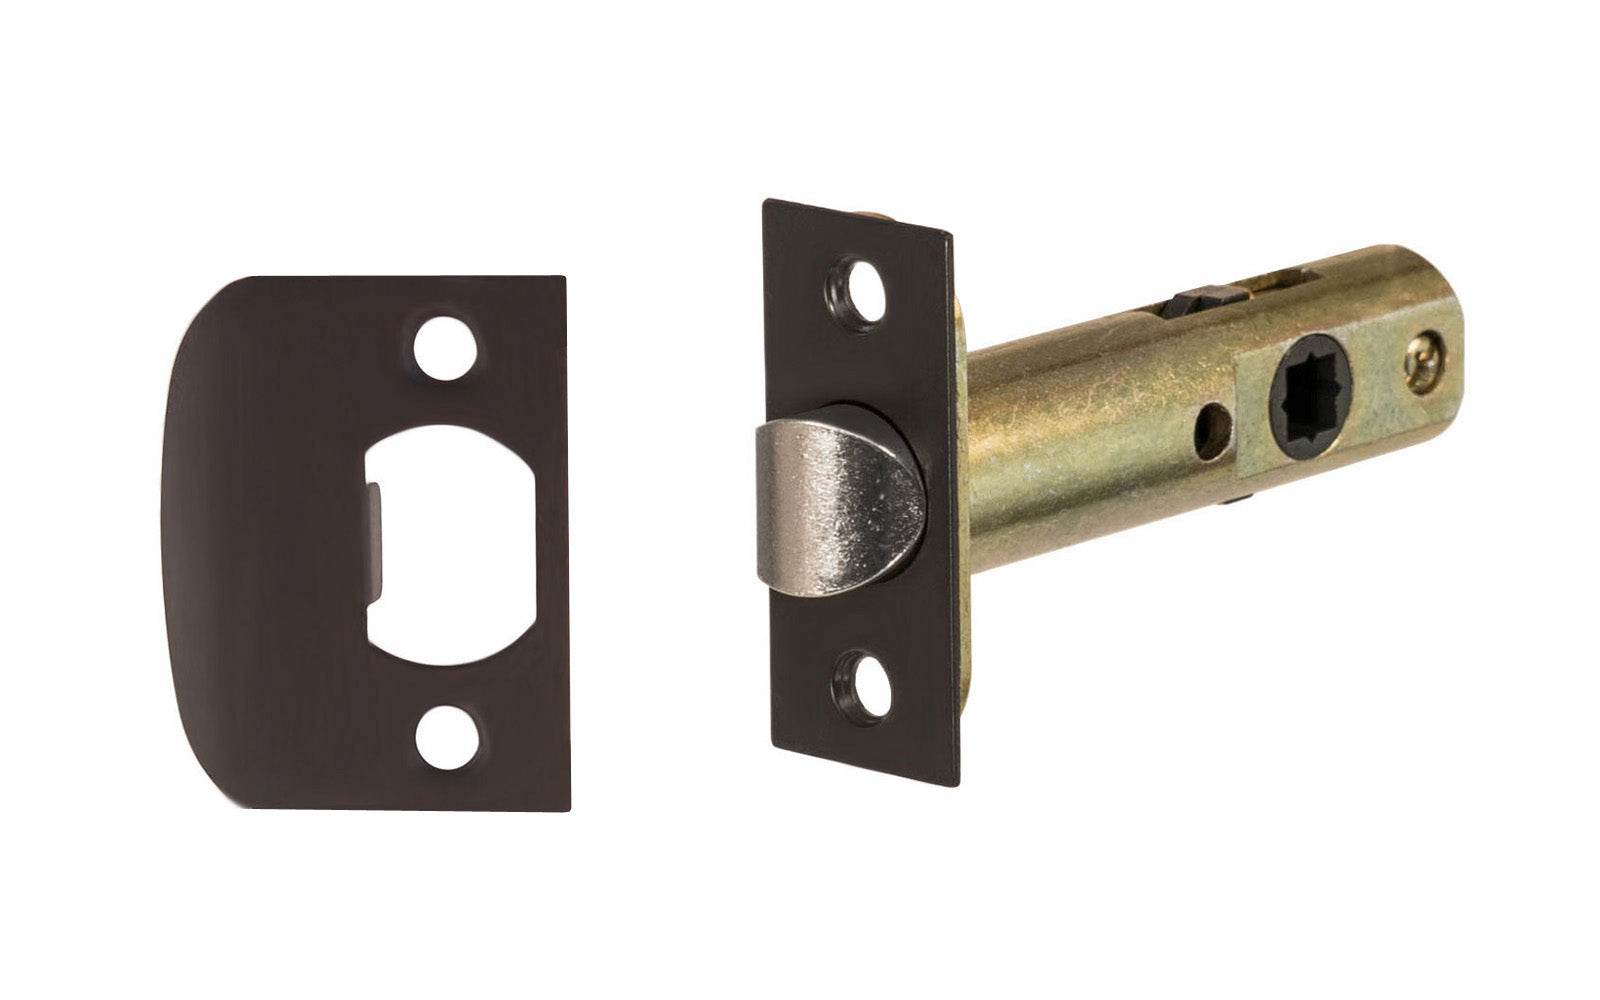 Vintage-style Hardware · Traditional & Classic Tubular Spring Latch for doors with a non-locking (Passage) function ~ 2-3/8" Backset. Steel casing & solid brass plates. For vintage antique door knobs, or reproduction door knobs. Oil Rubbed Bronze Finish